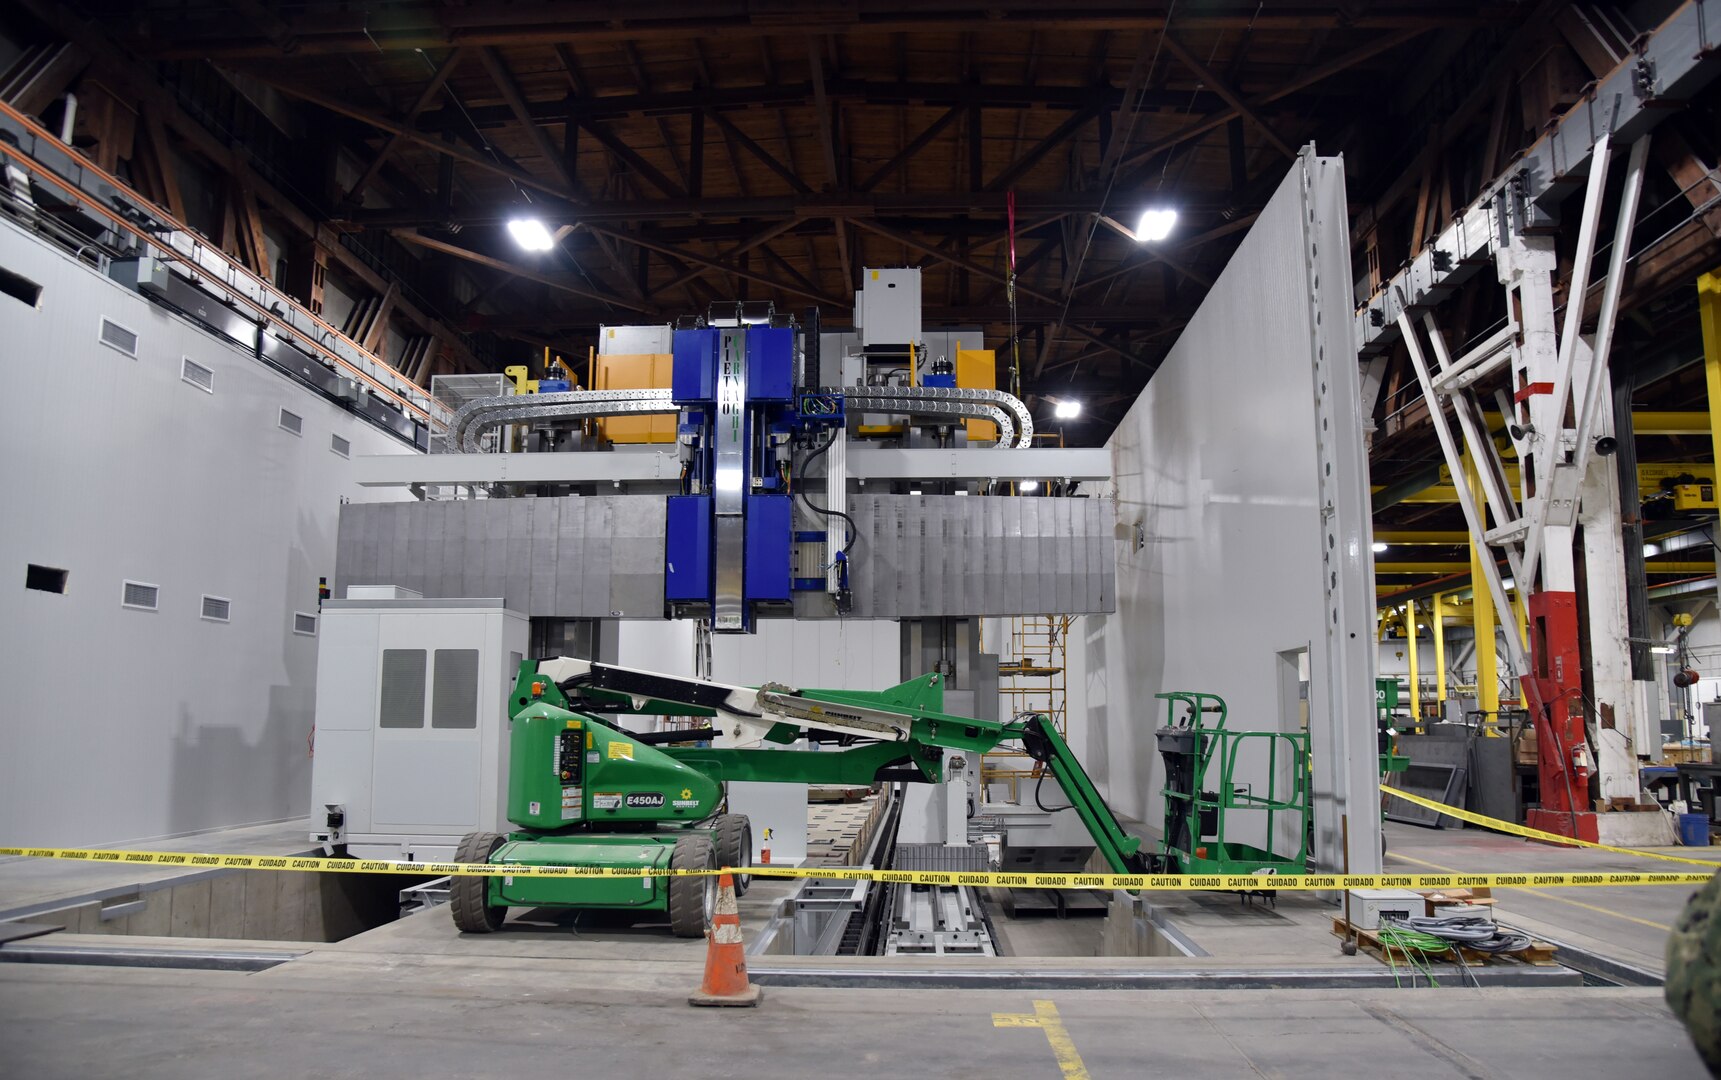 Gantry machine provides critical functions in support of the warfighter